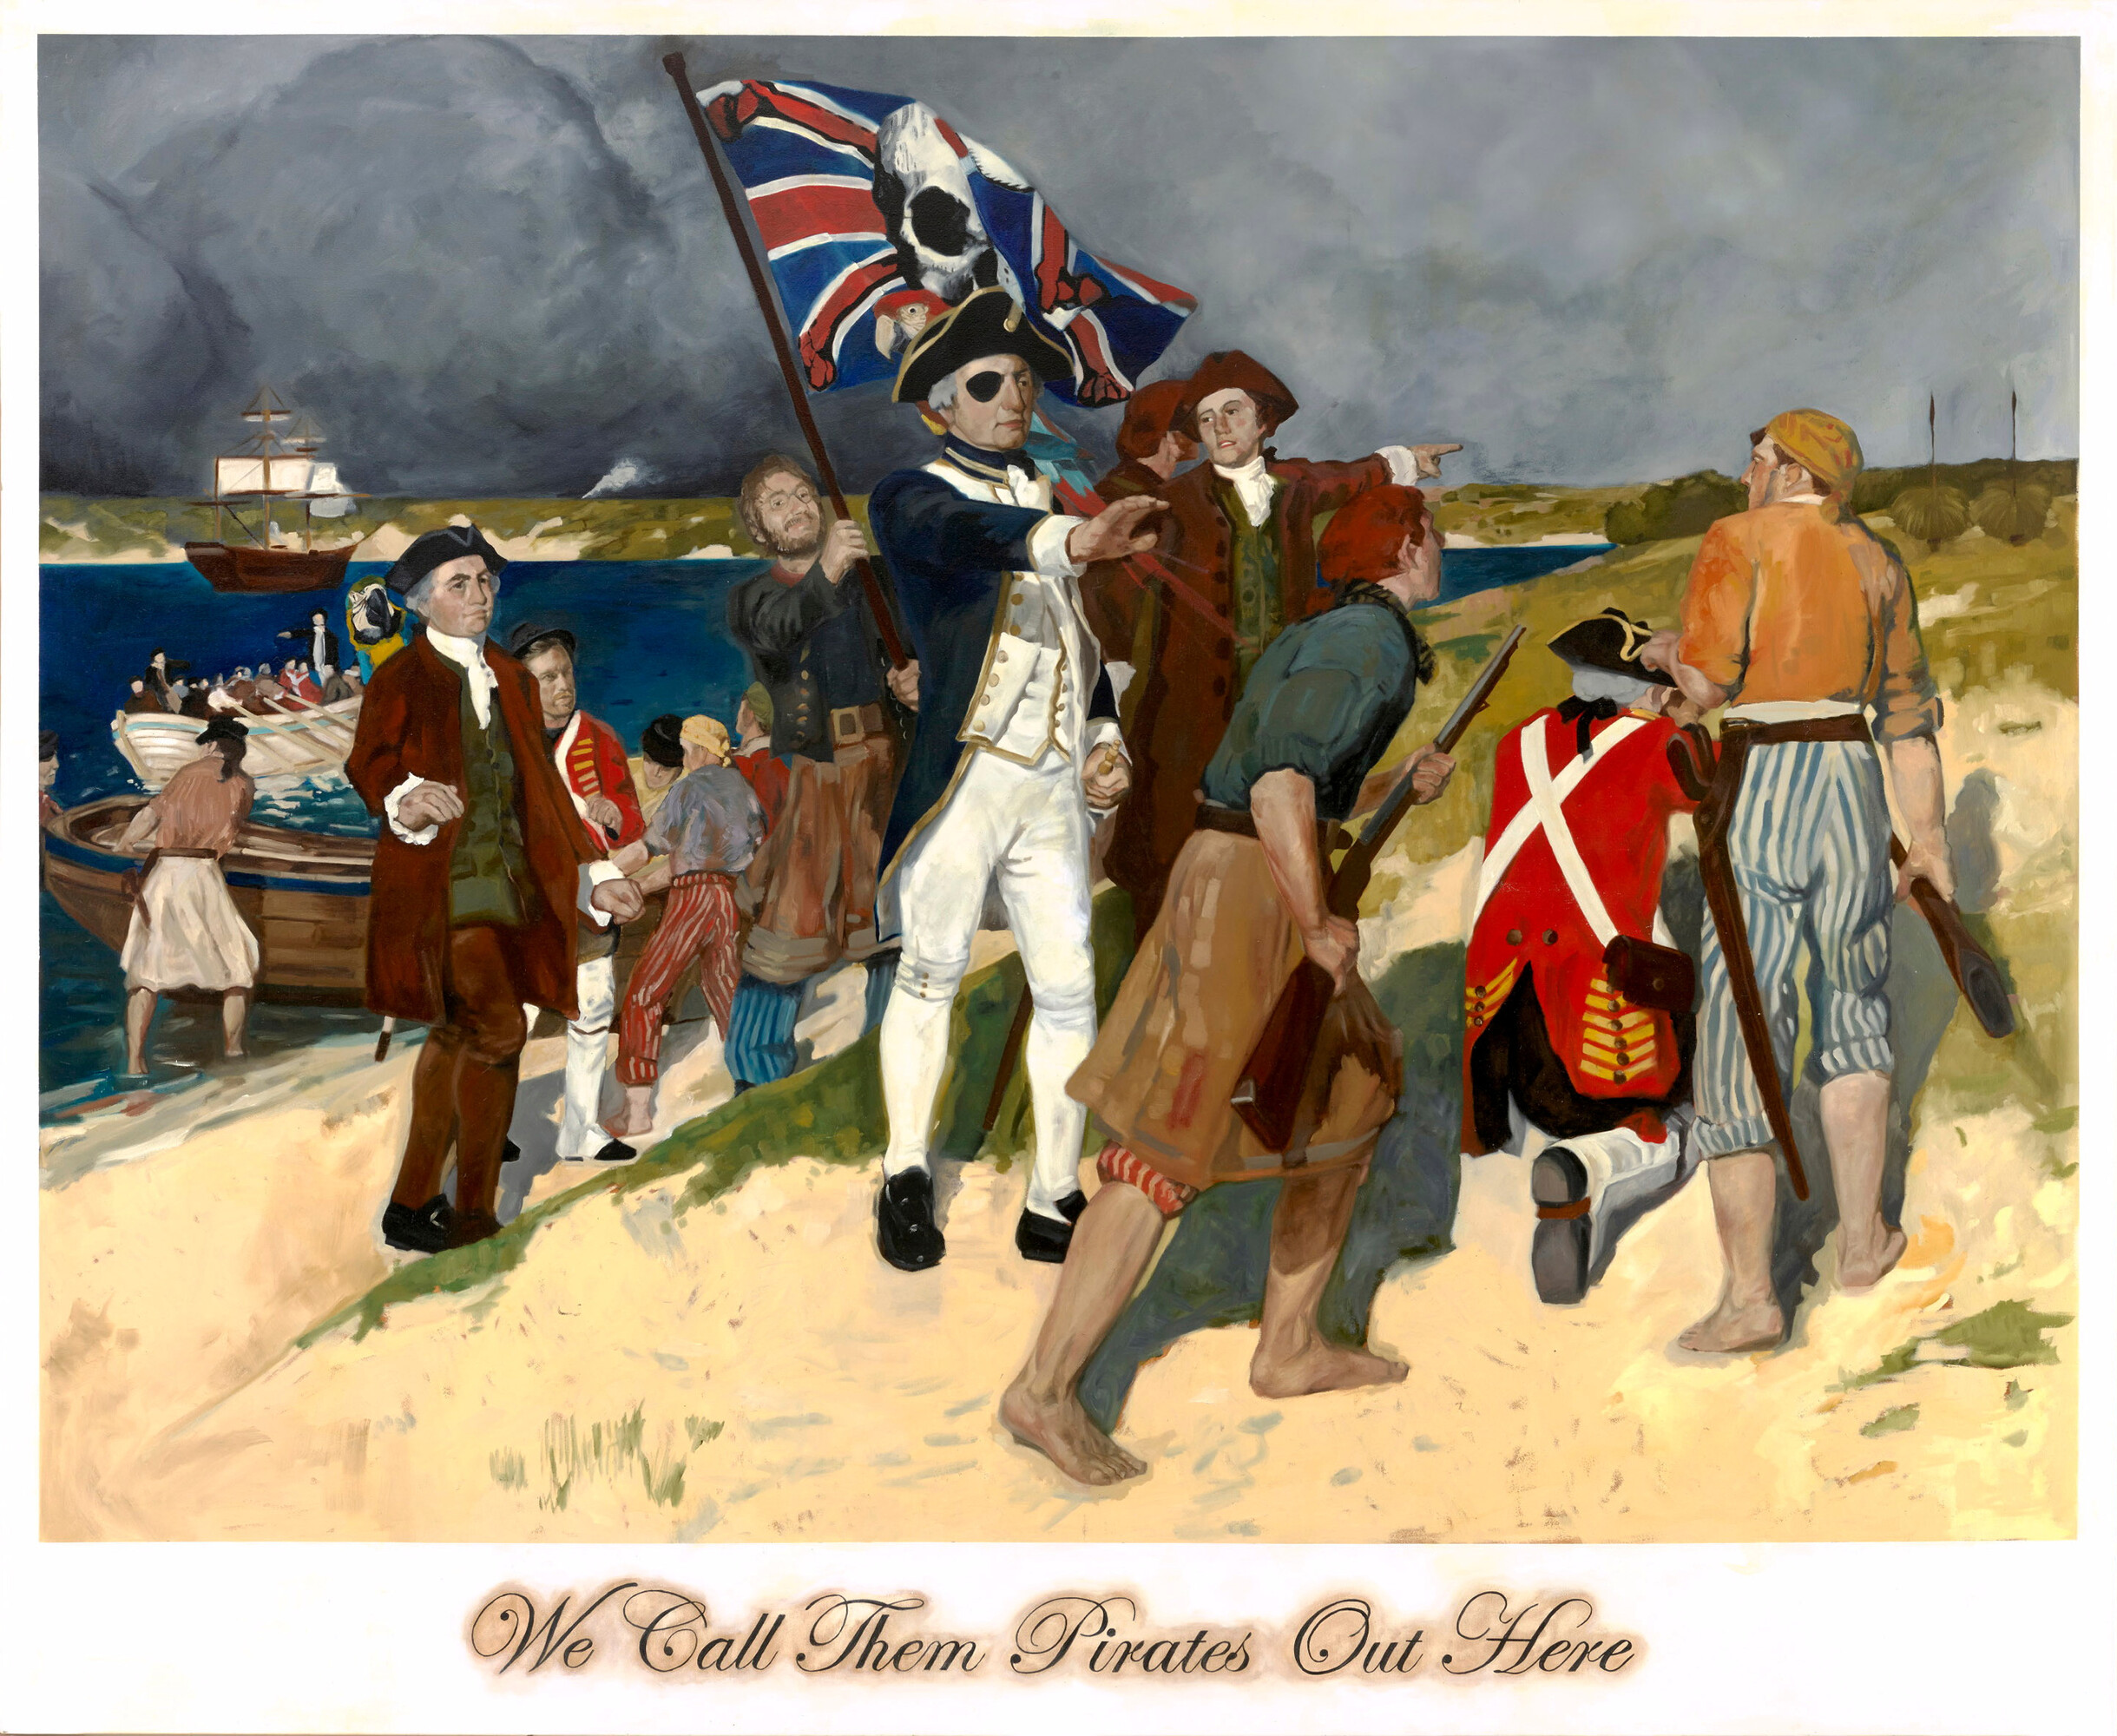 Daniel Boyd, <em>We call them pirates out here</em>, 2006, oil on canvas, 226 x 276 x 3.5 cm, Museum of Contemporary Art Australia, Sydney, purchased with funds provided by the Coe and Mordant families, 2006, 2006.25. Image: AGNSW, Jeni Carter. © Daniel Boyd